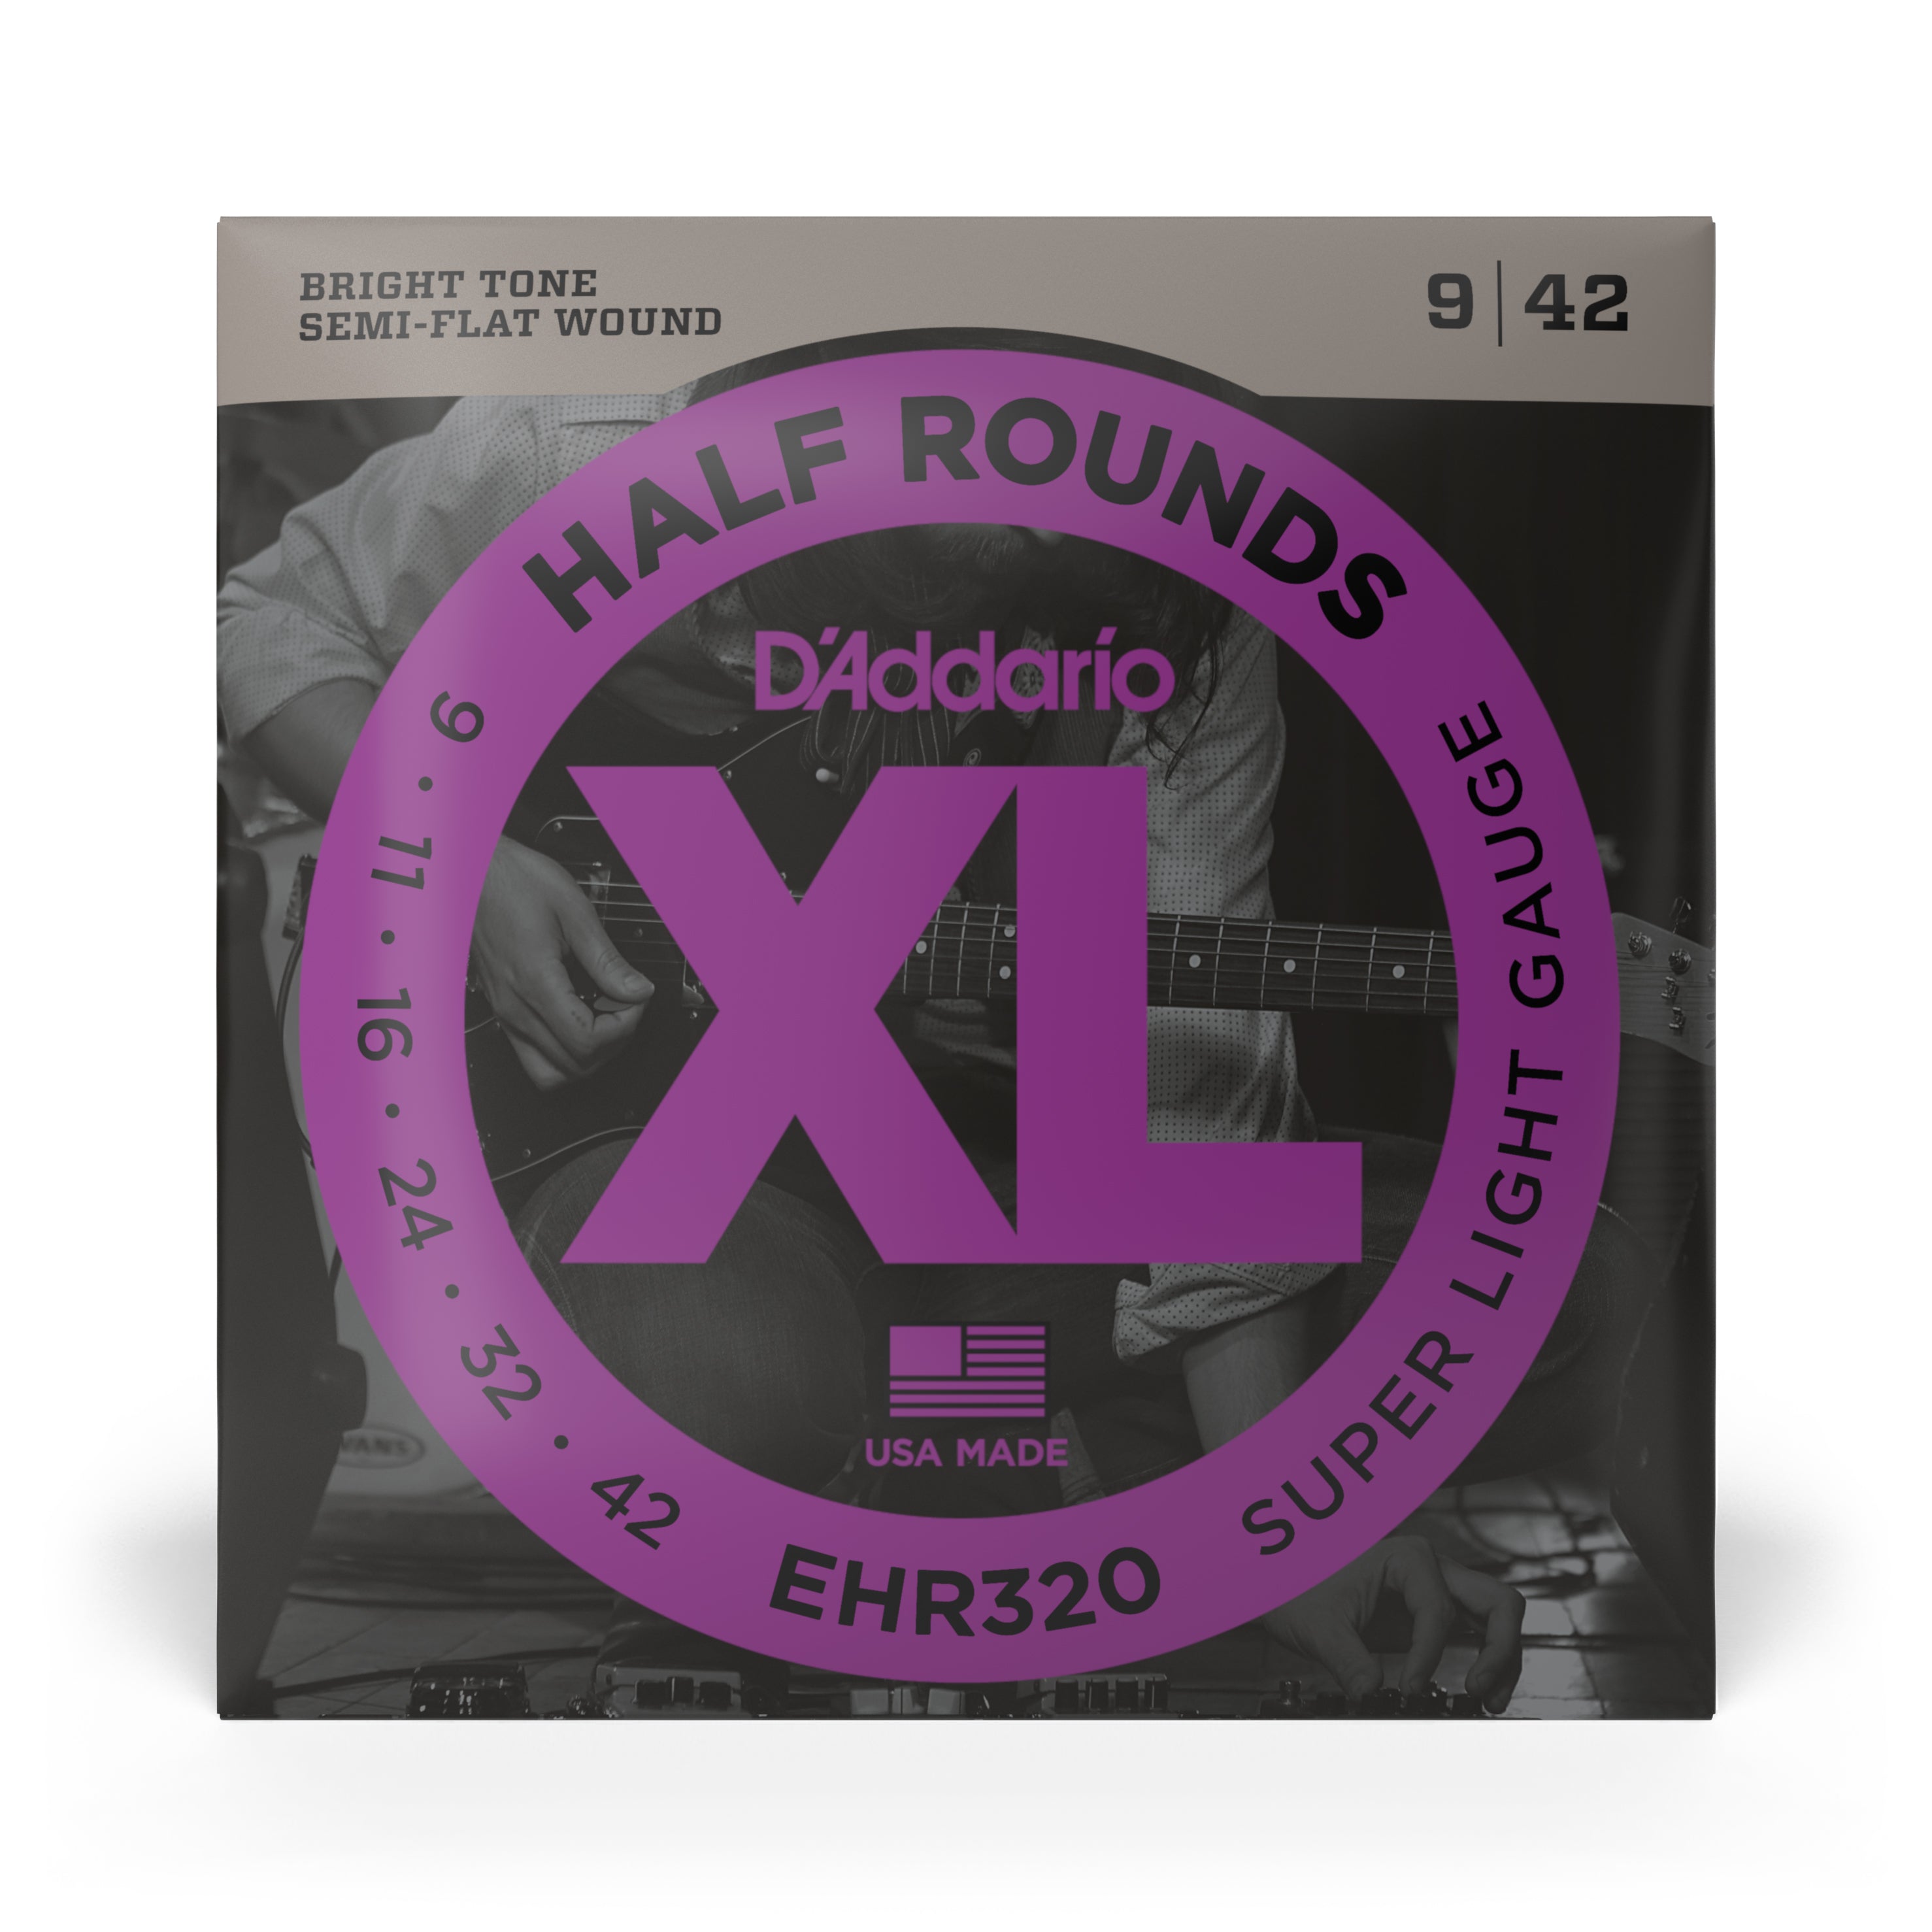 D'Addario Half Rounds Stainless Steel 9-42 Electric Guitar Strings, Super Light